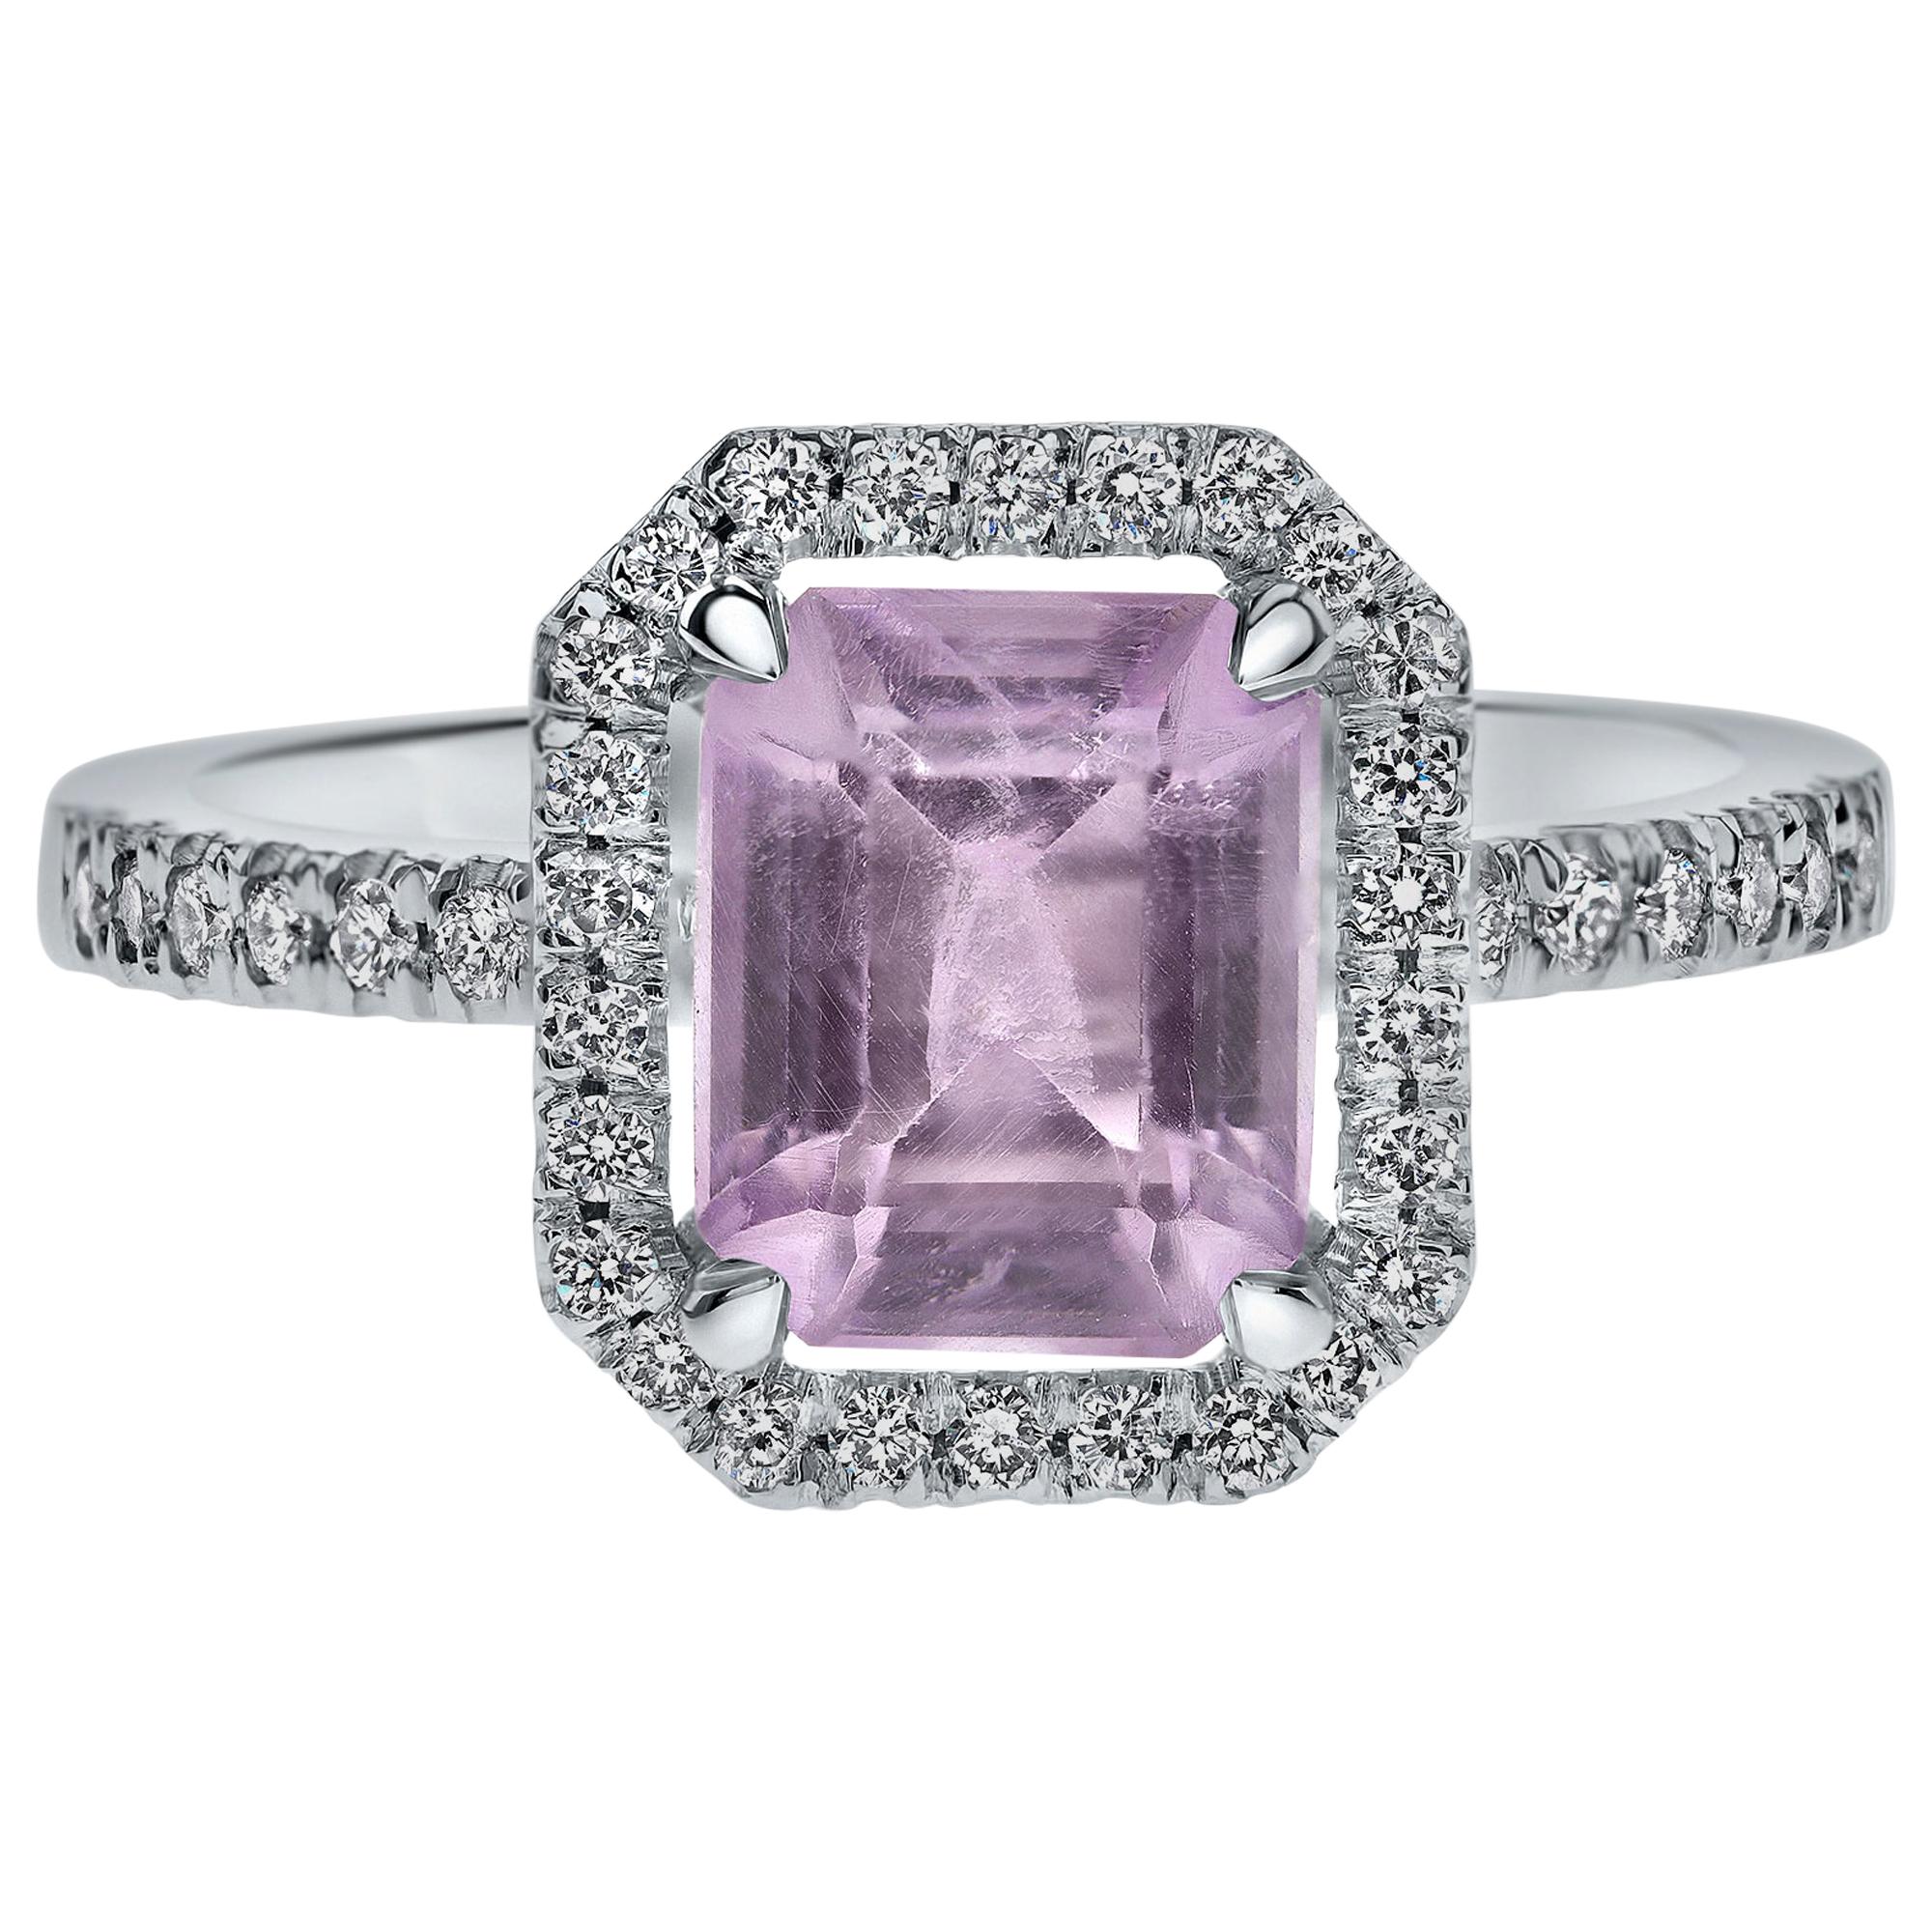 1.65 Carat Emerald Cut Amethyst and Diamonds Ring in White Gold - Shlomit Rogel For Sale